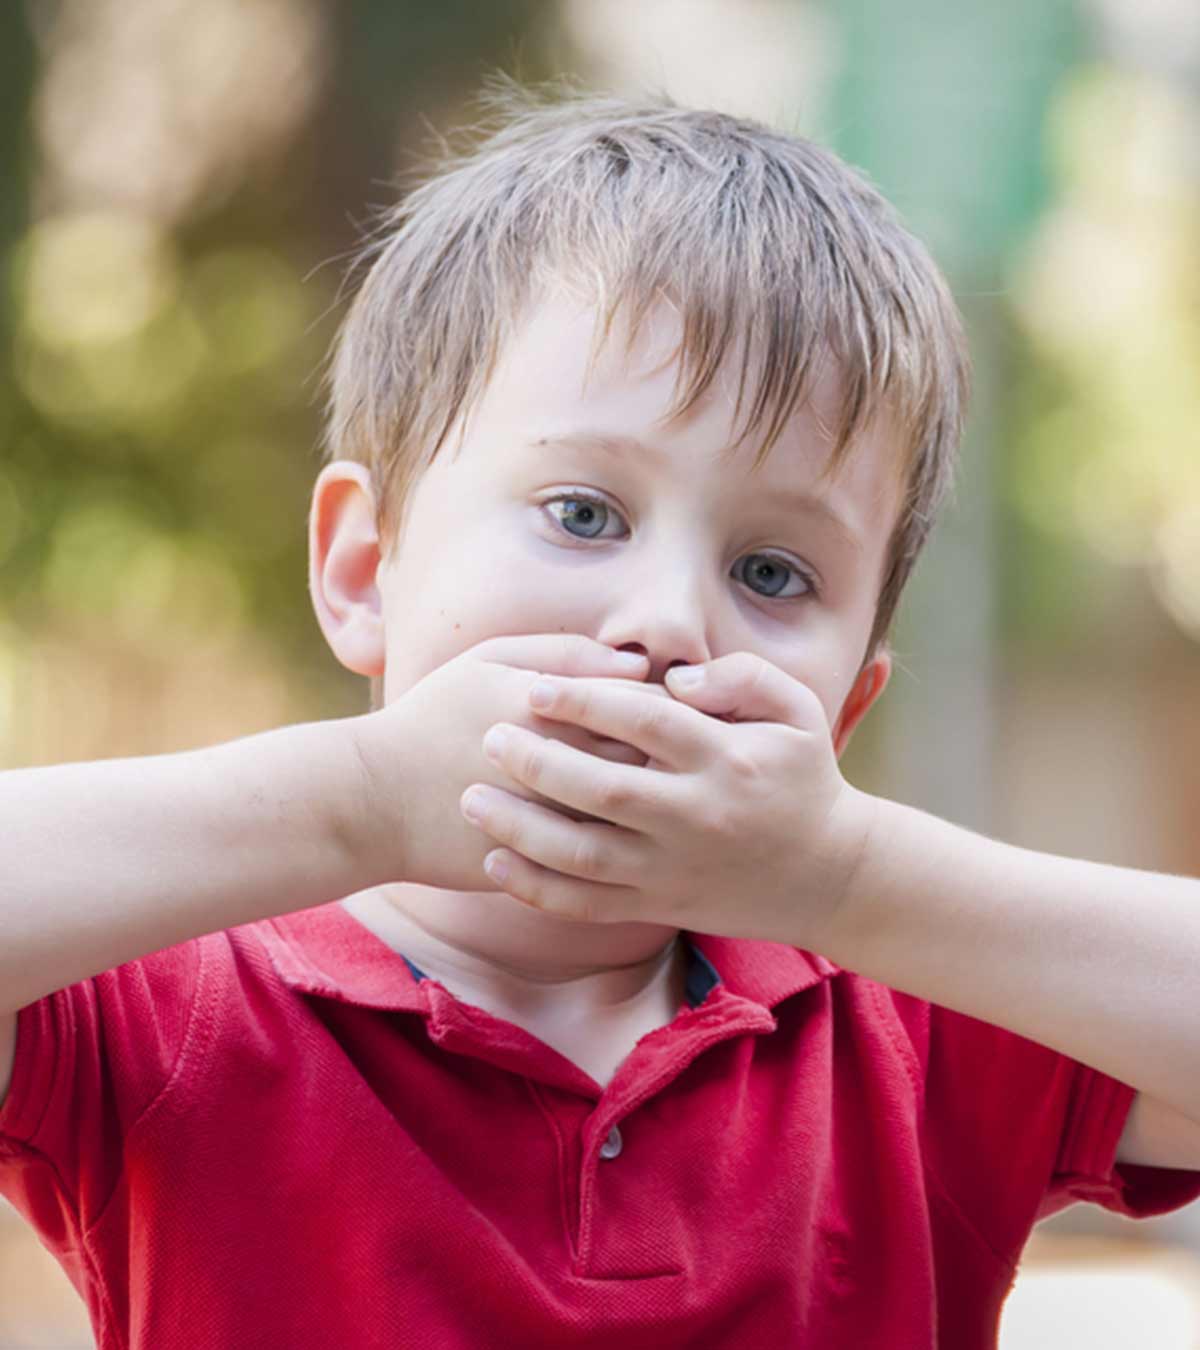 What Causes Hiccups In Children And How To Stop Them?